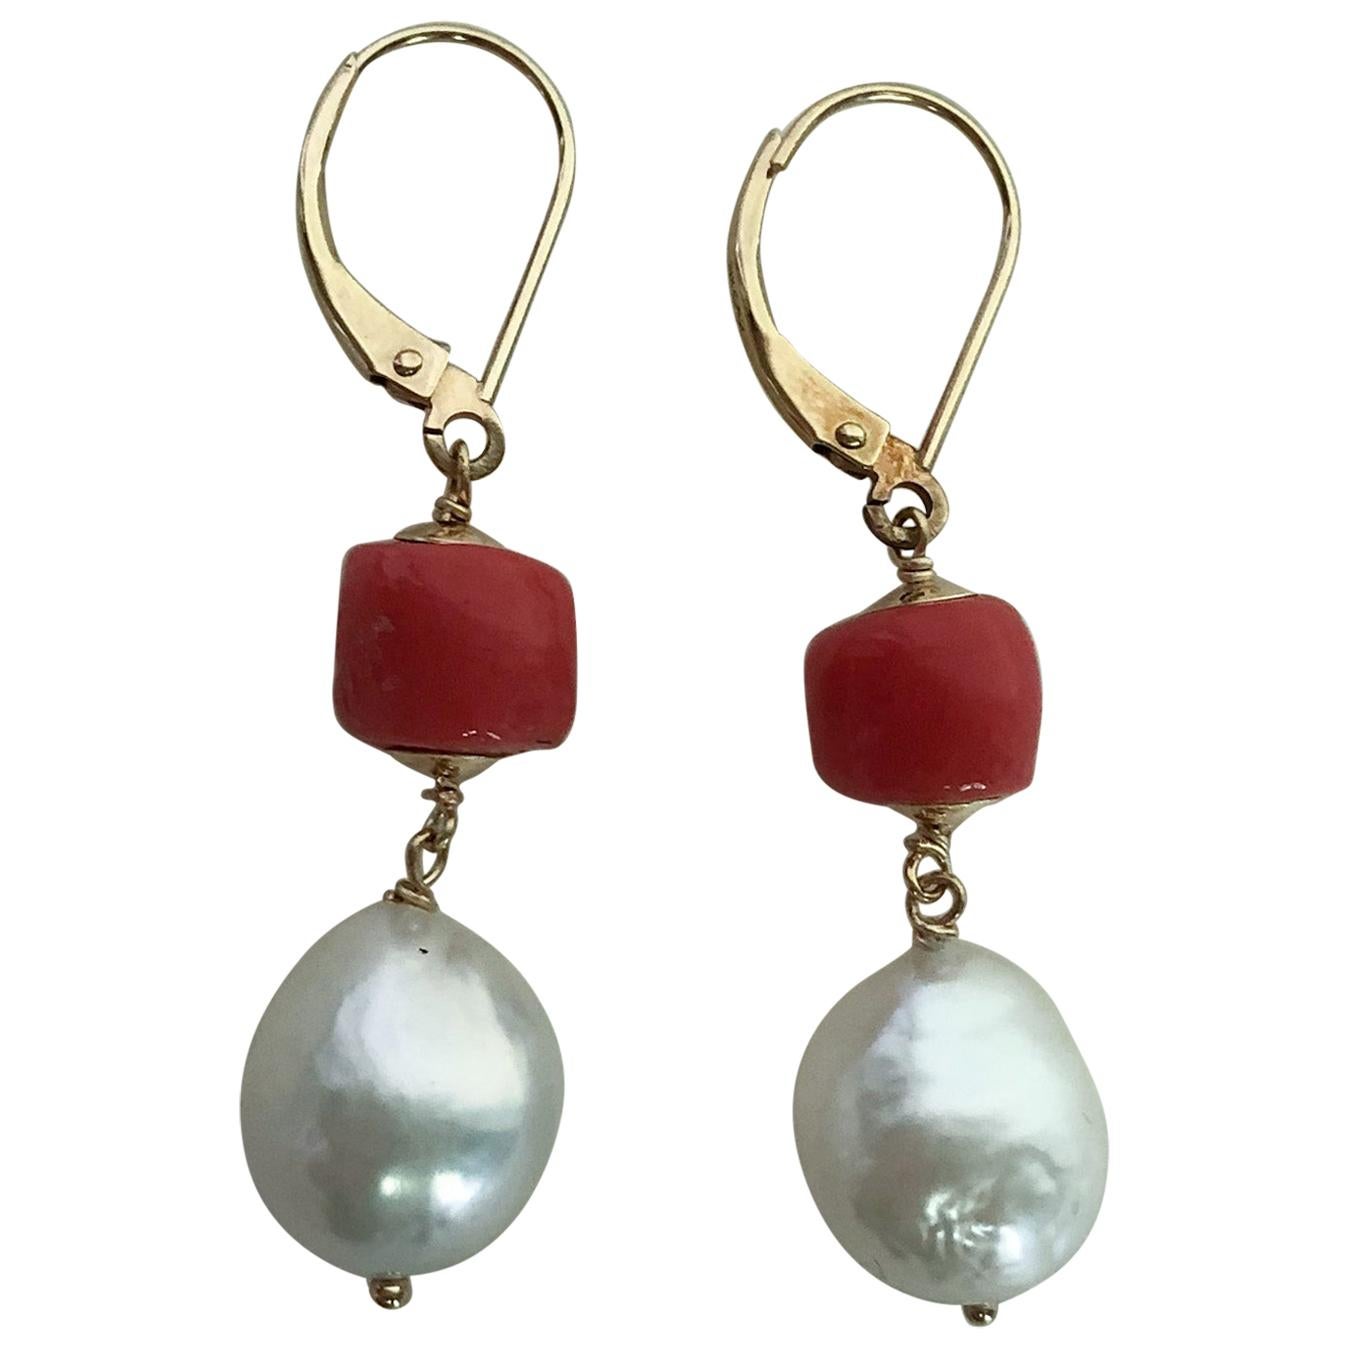 Marina J. Coral and White Pearl Drop Earrings with 14 Karat Gold Lever-Backs